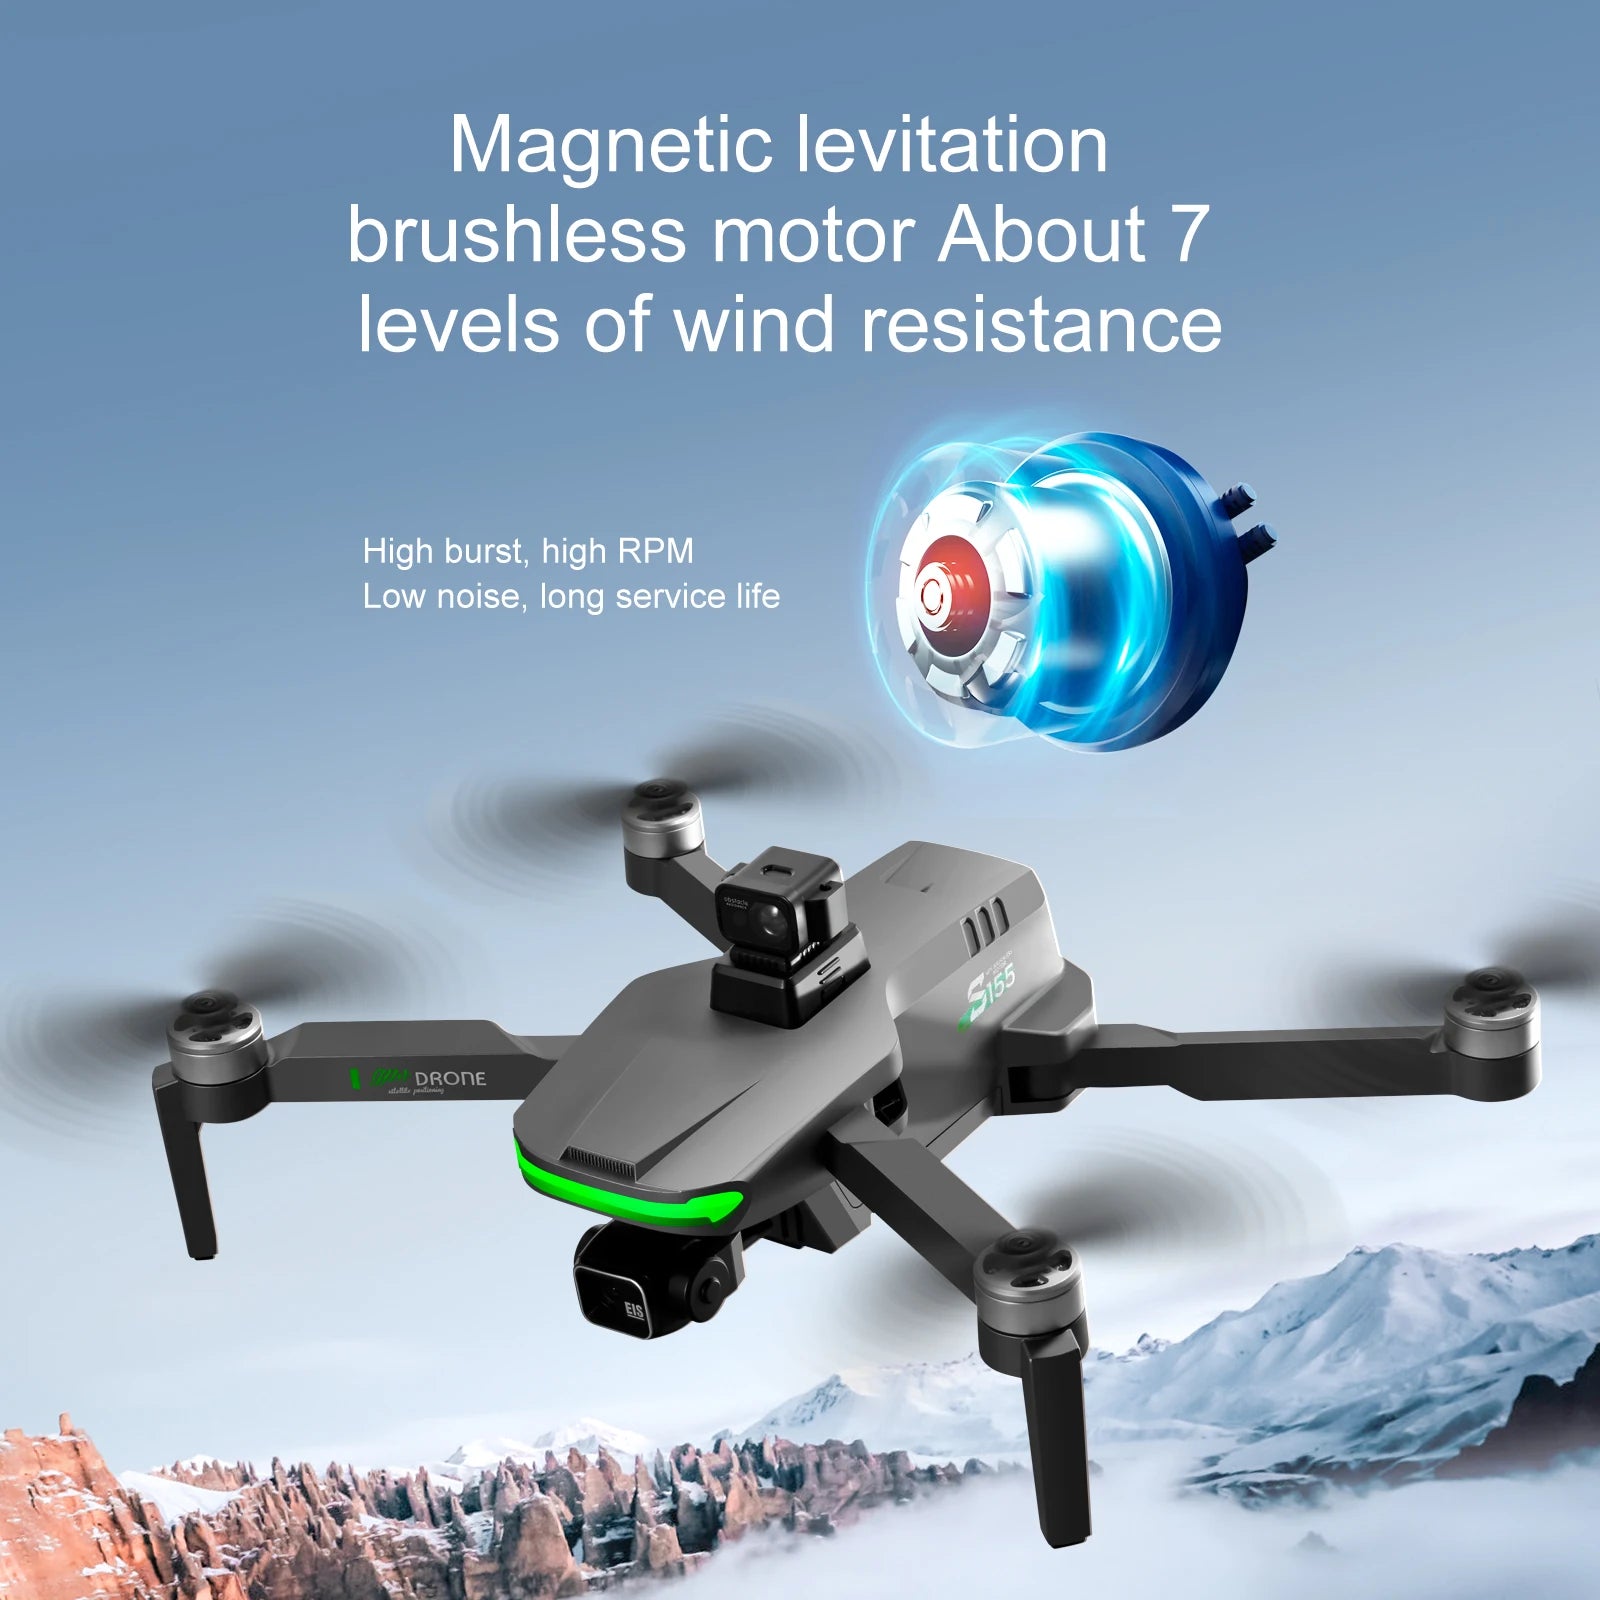 S155 Drone, magnetic levitation brushless motor About 7 levels of wind resistance High burst; high